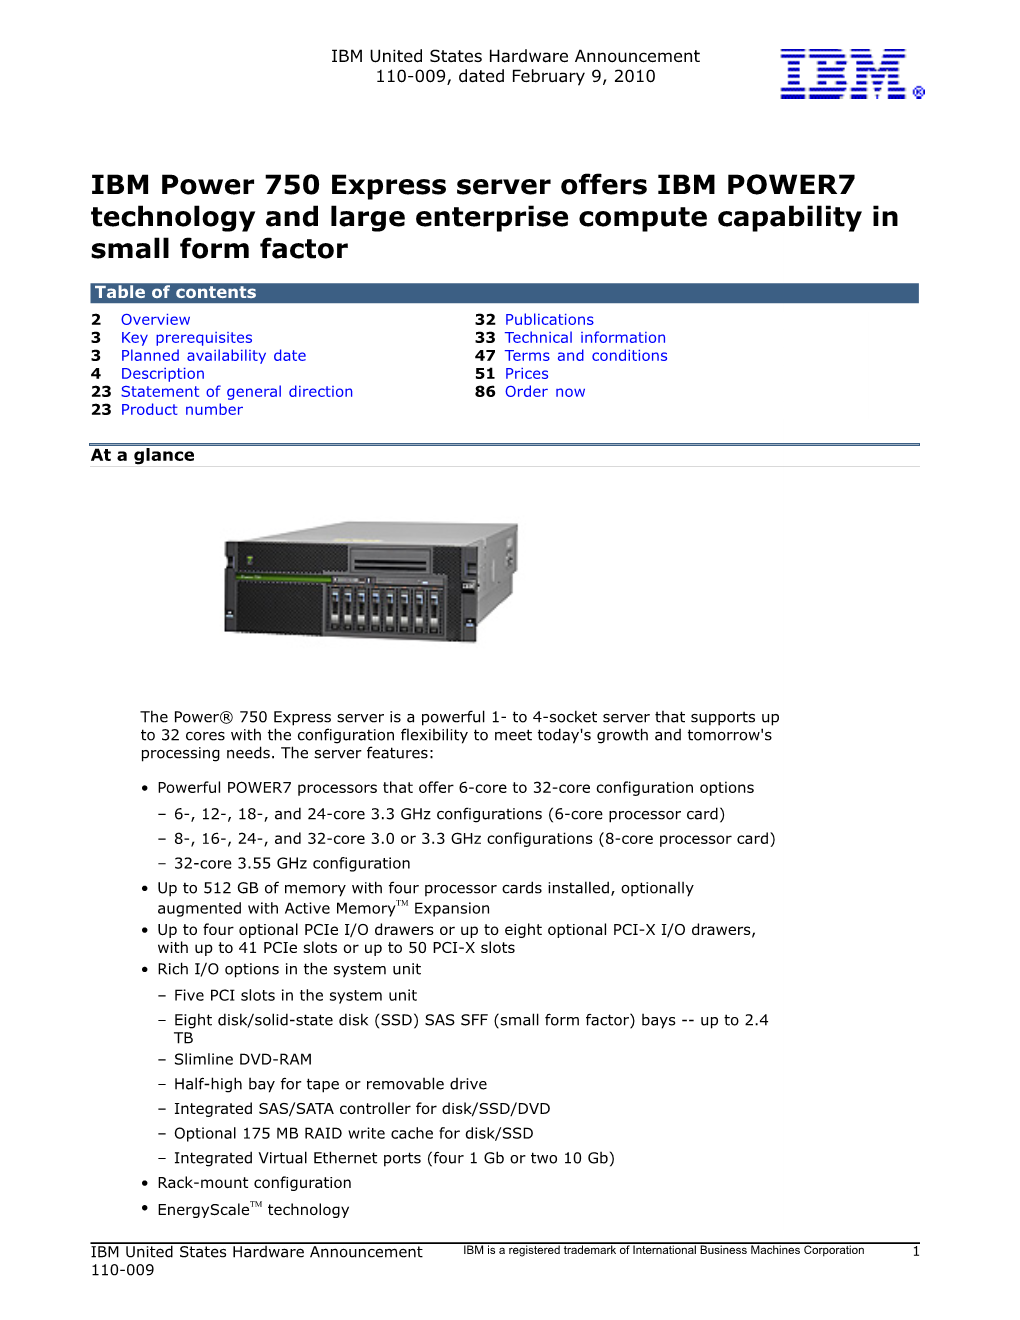 IBM Power 750 Express Server Offers IBM POWER7 Technology and Large Enterprise Compute Capability in Small Form Factor